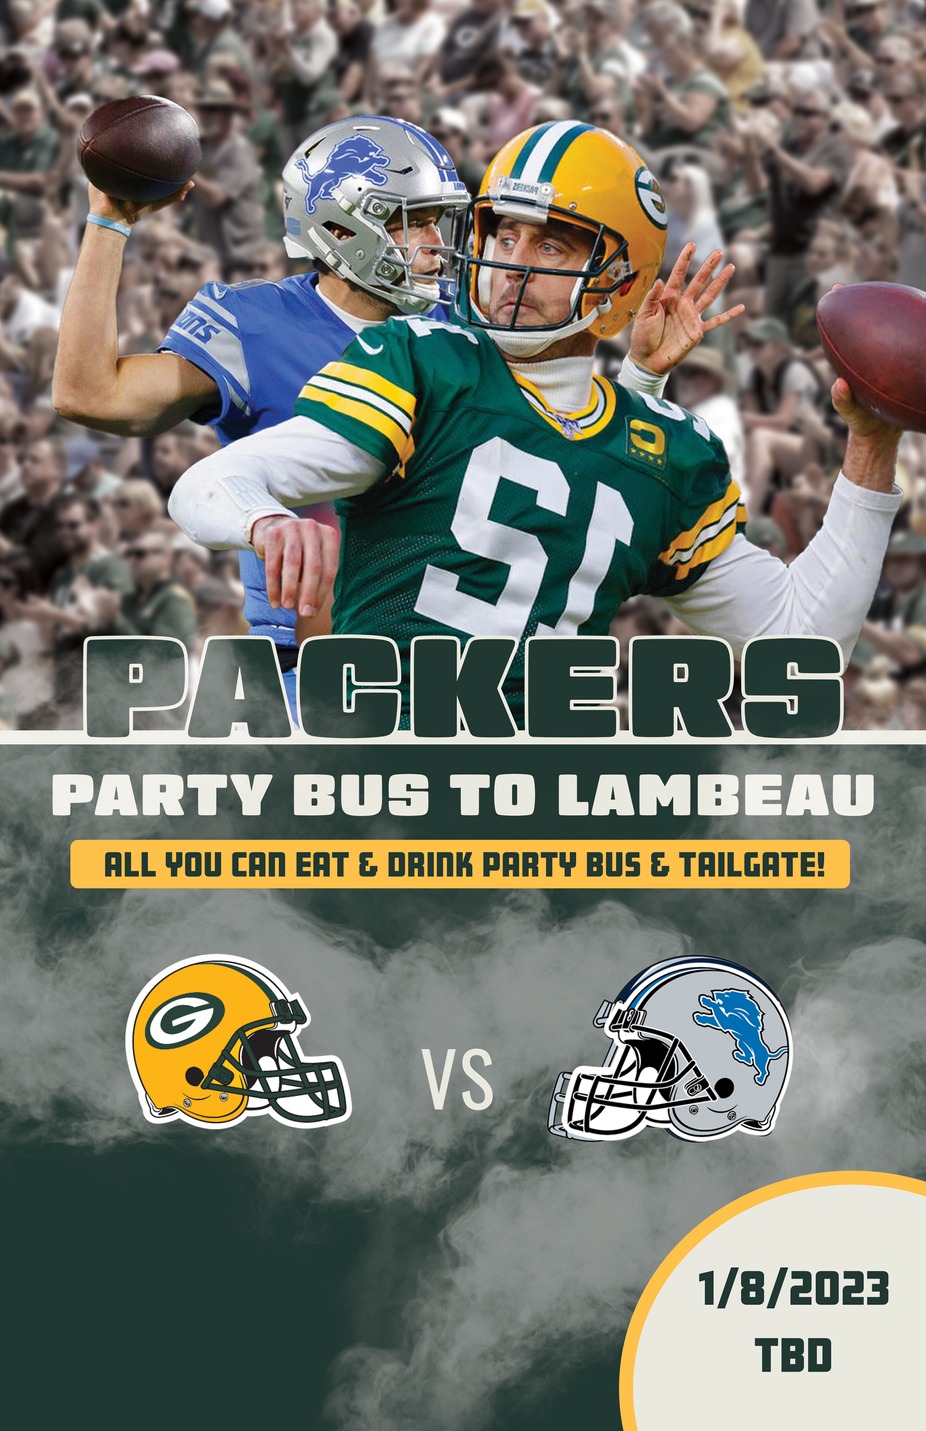 Packers Vs. Lions Party Bus to Lambeau event photo